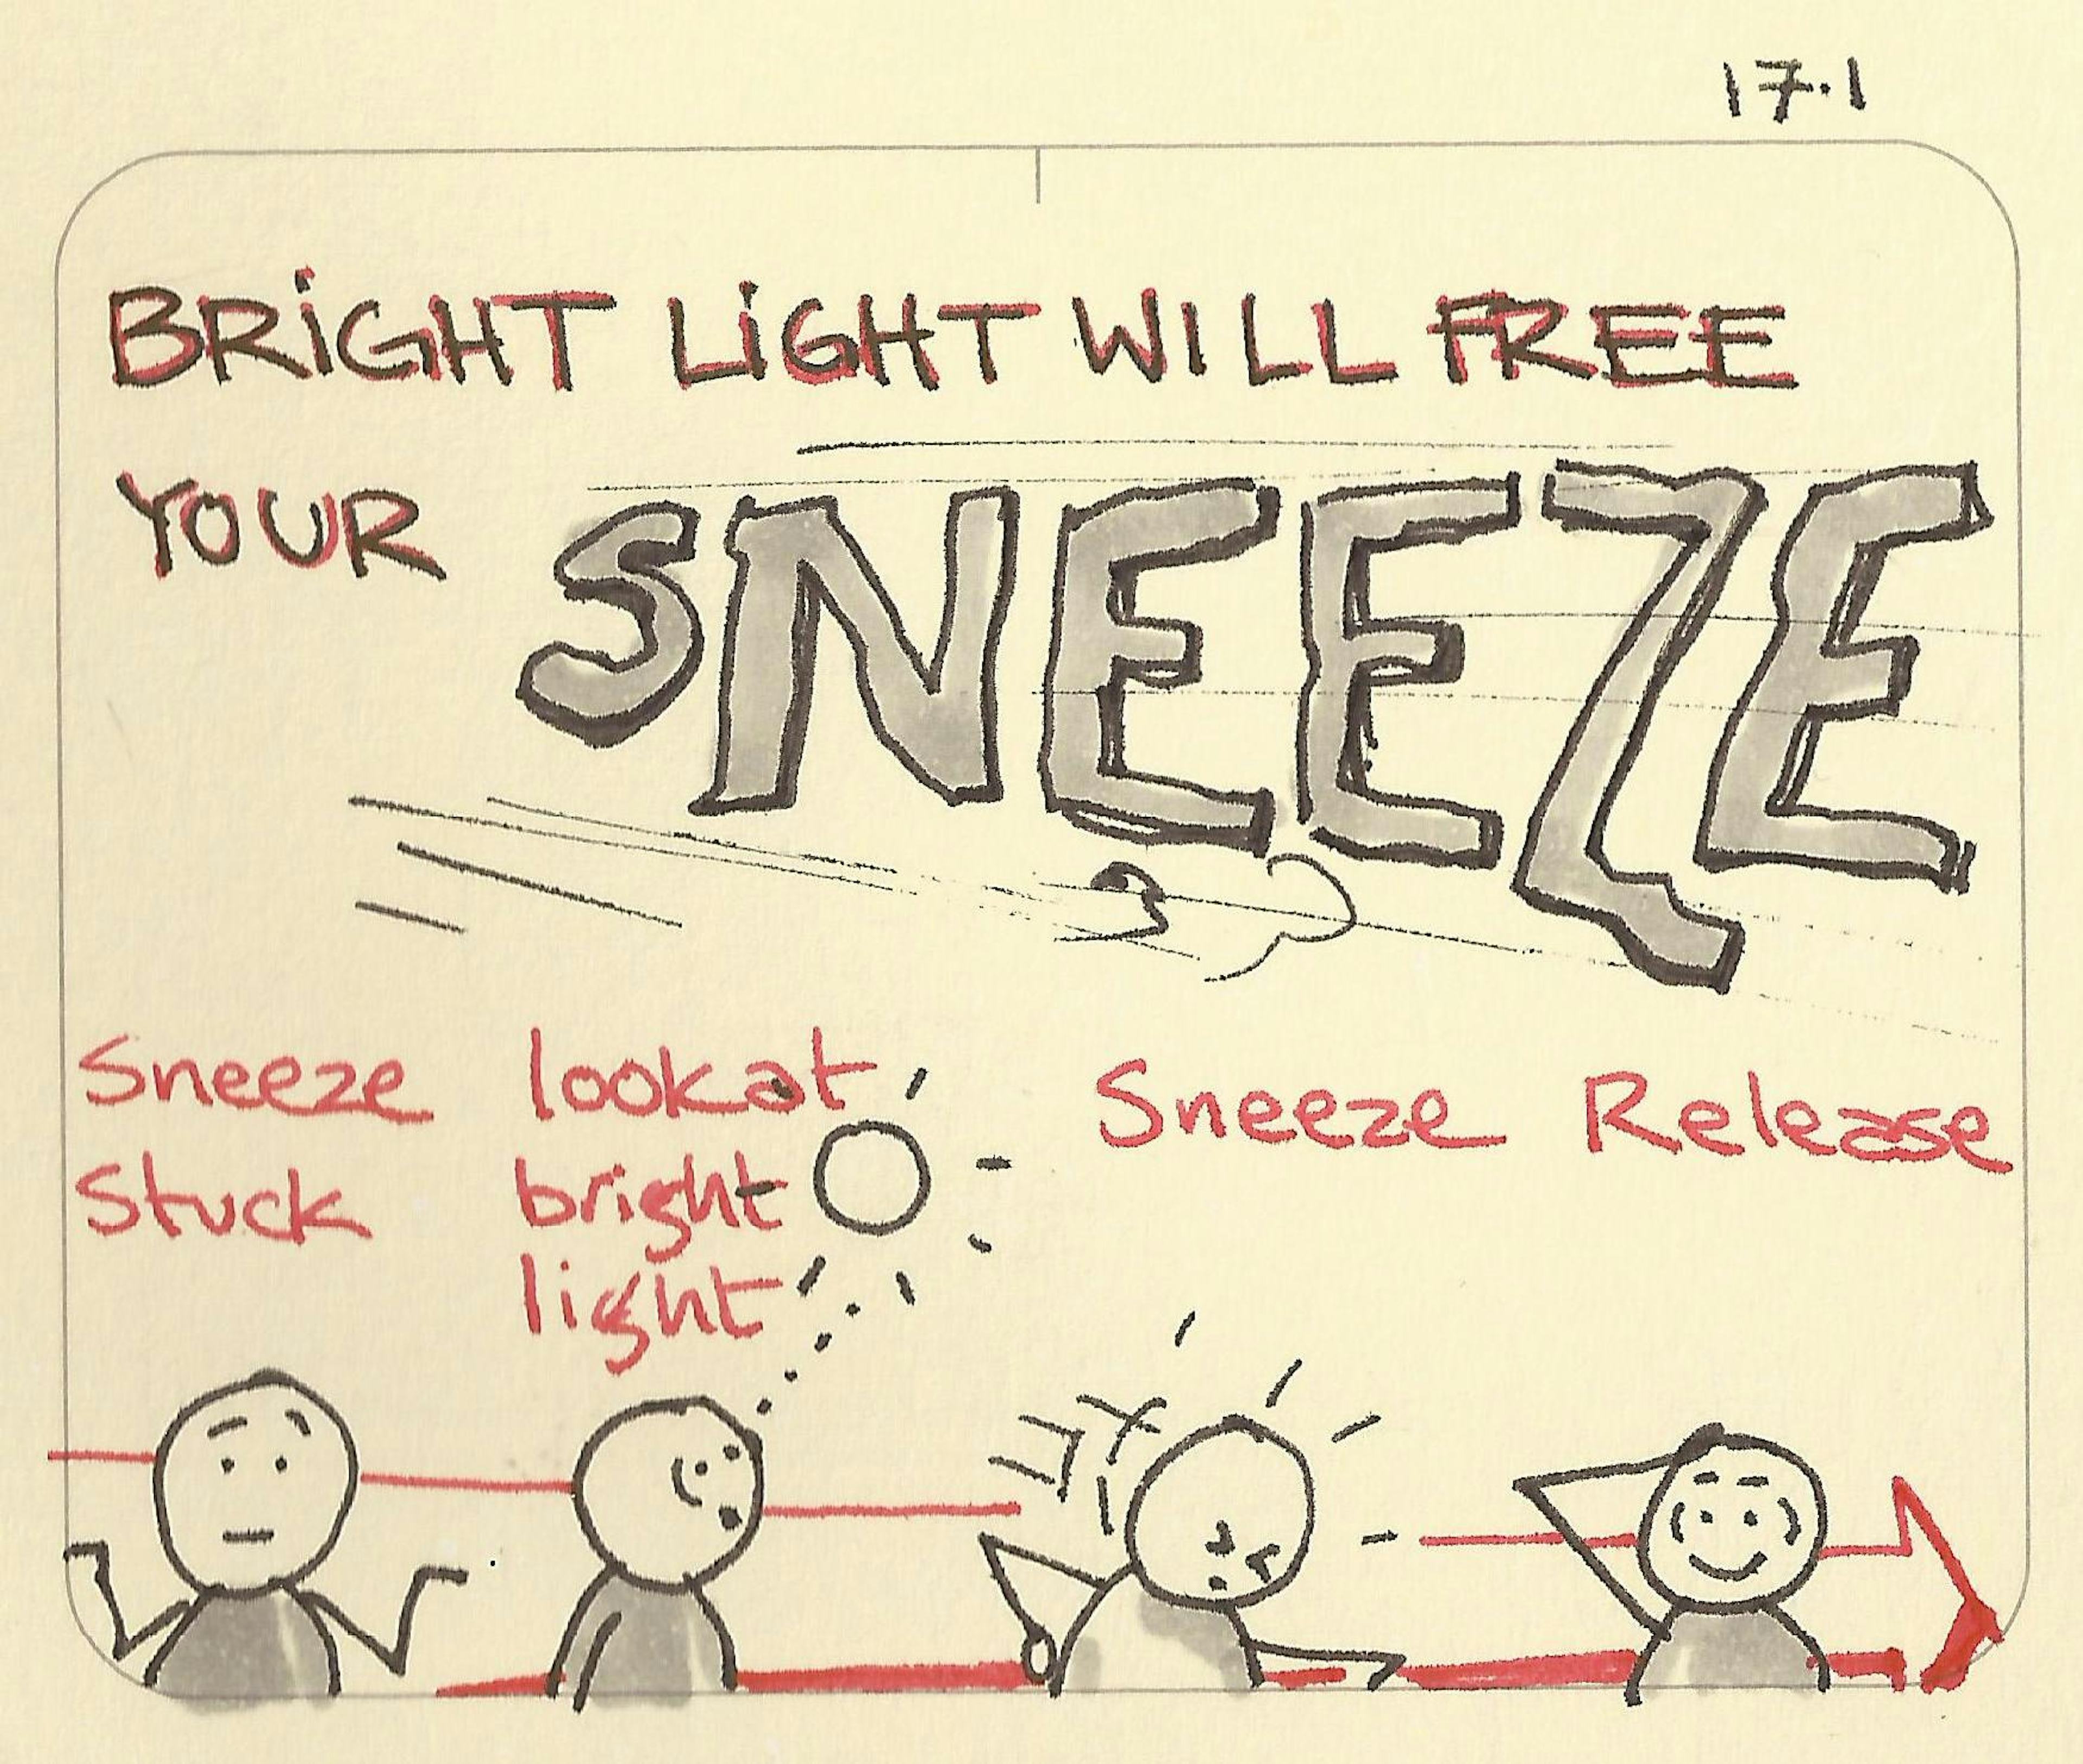 Bright light free your sneeze - Sketchplanations